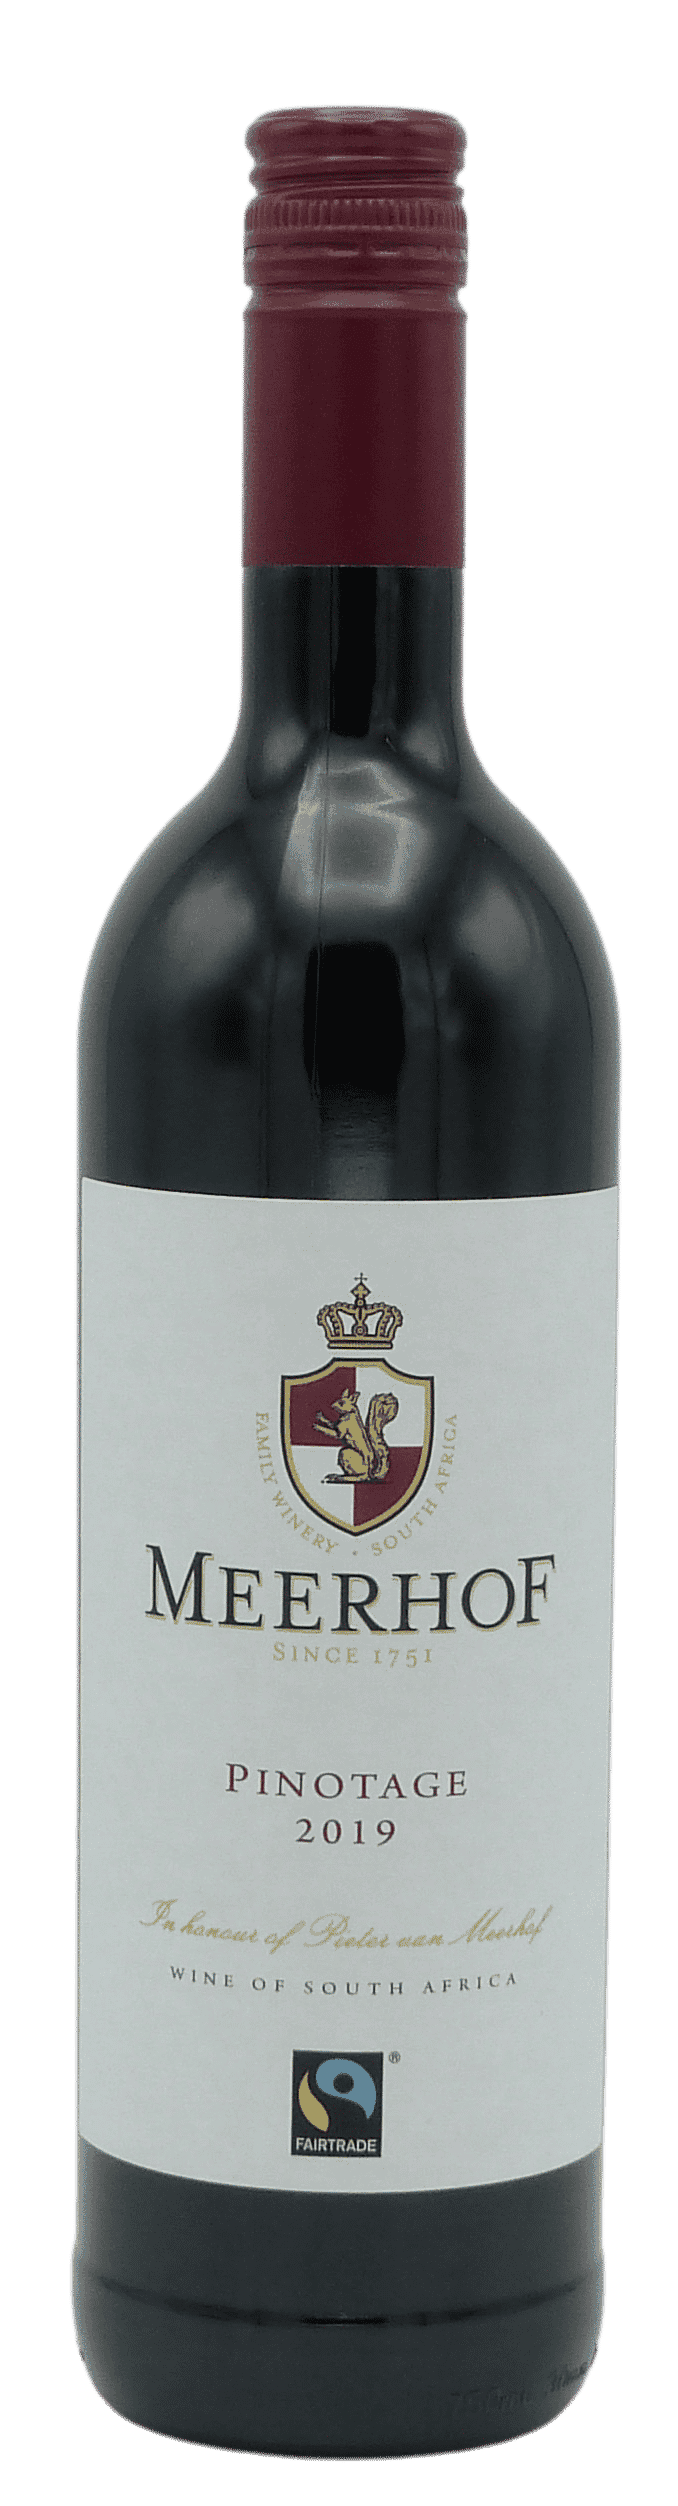 Meerhof Pinotage 2019 - Cape & Grapes